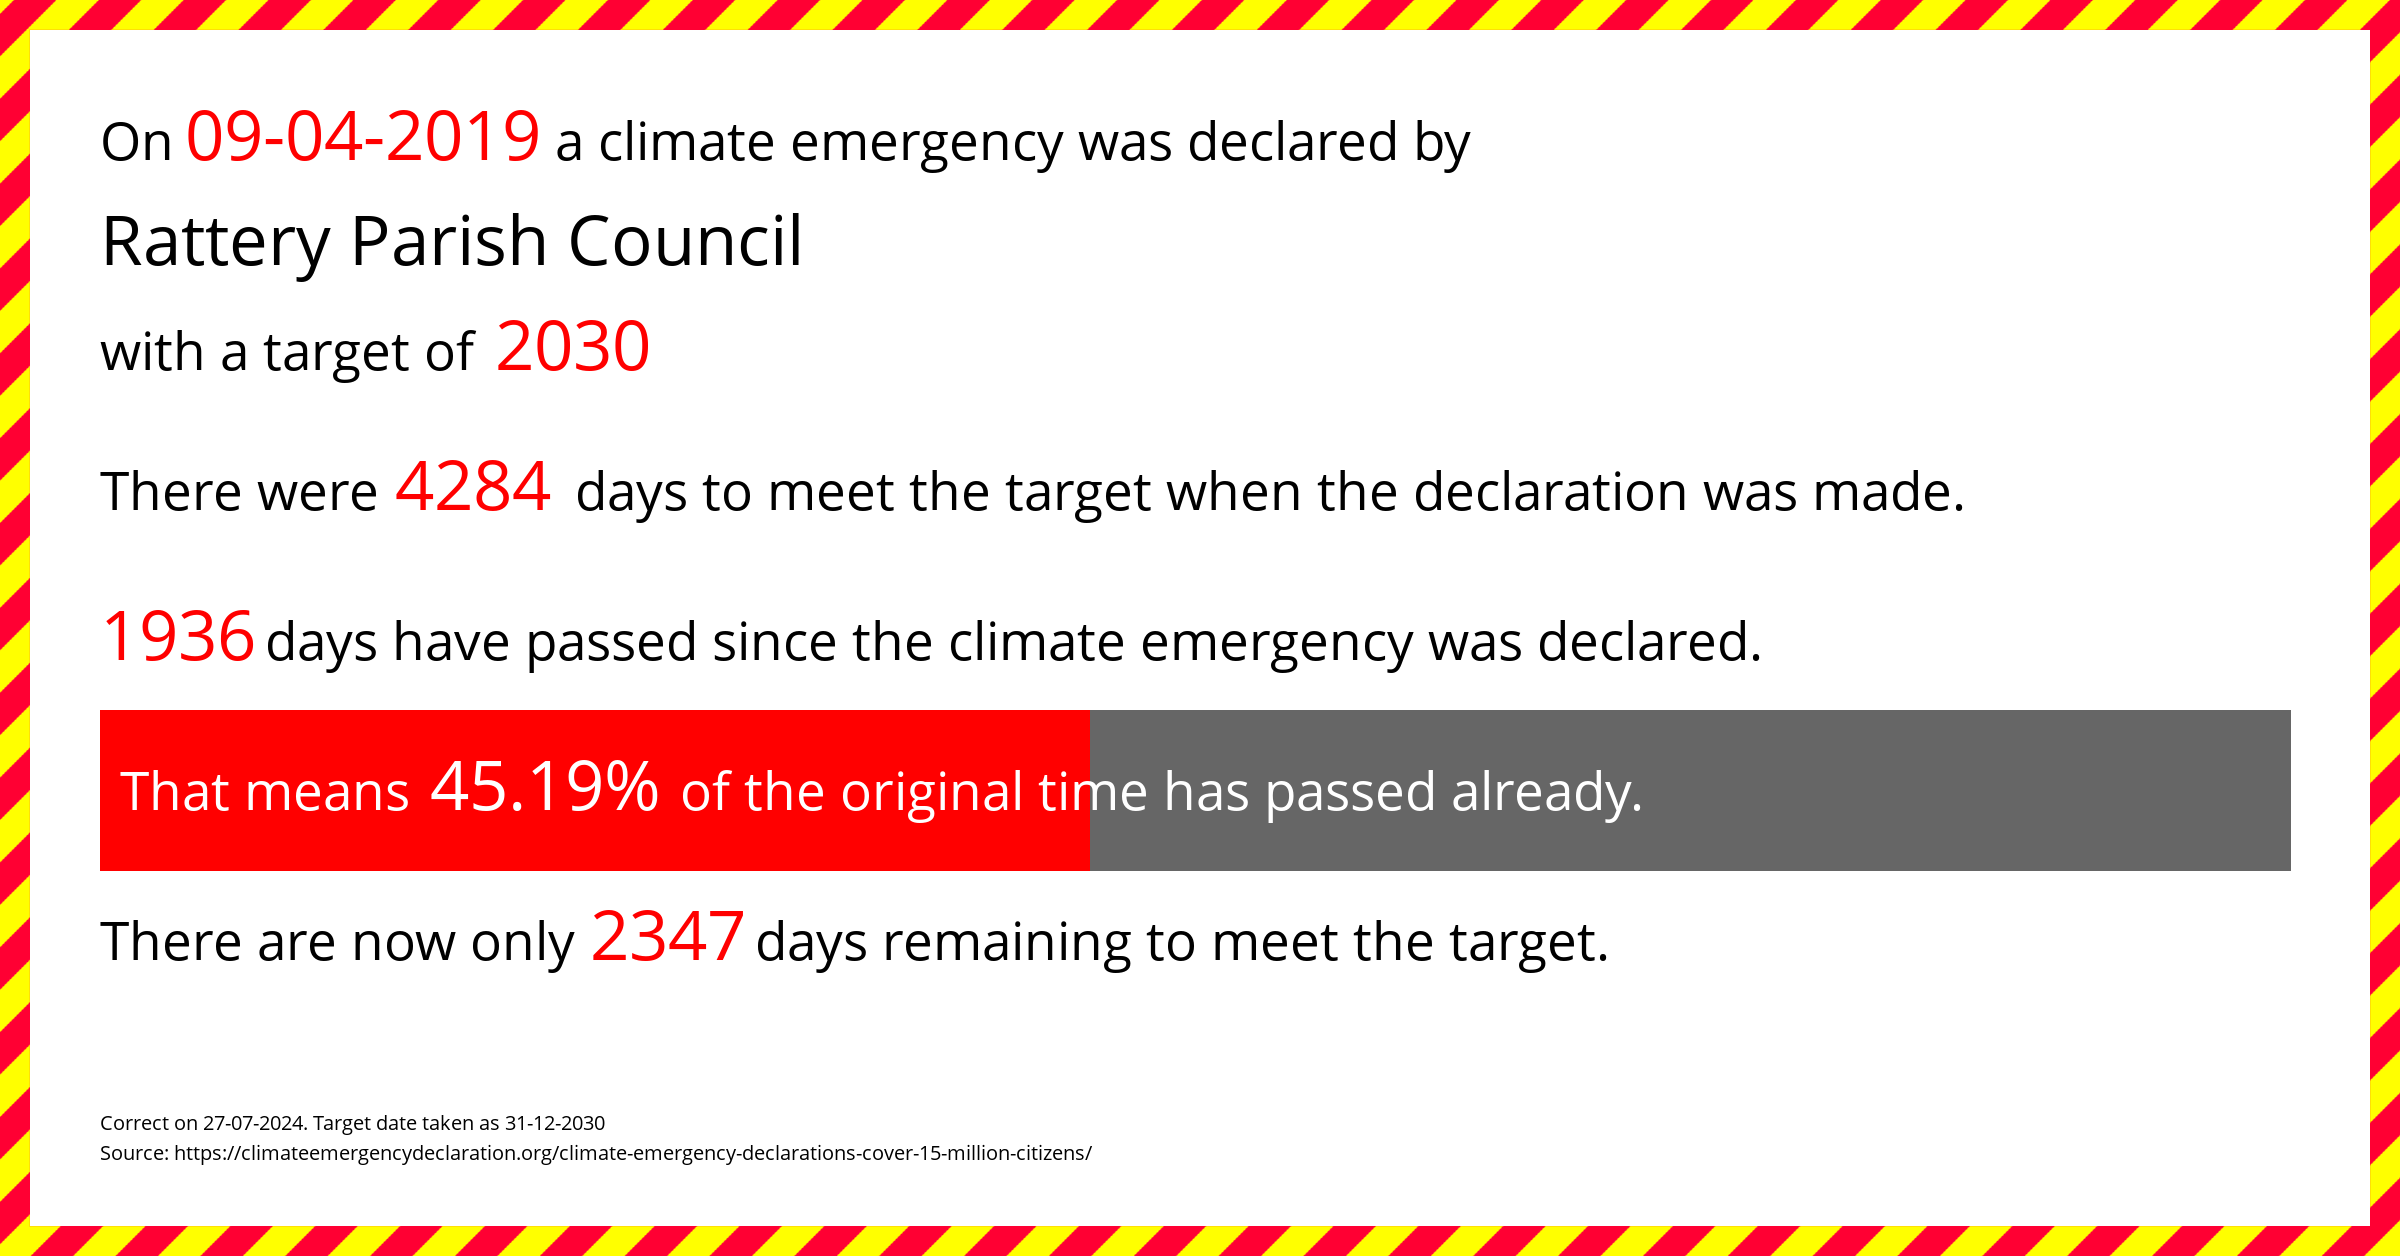 Rattery Parish Council declared a Climate emergency on Tuesday 9th April 2019, with a target of 2030.